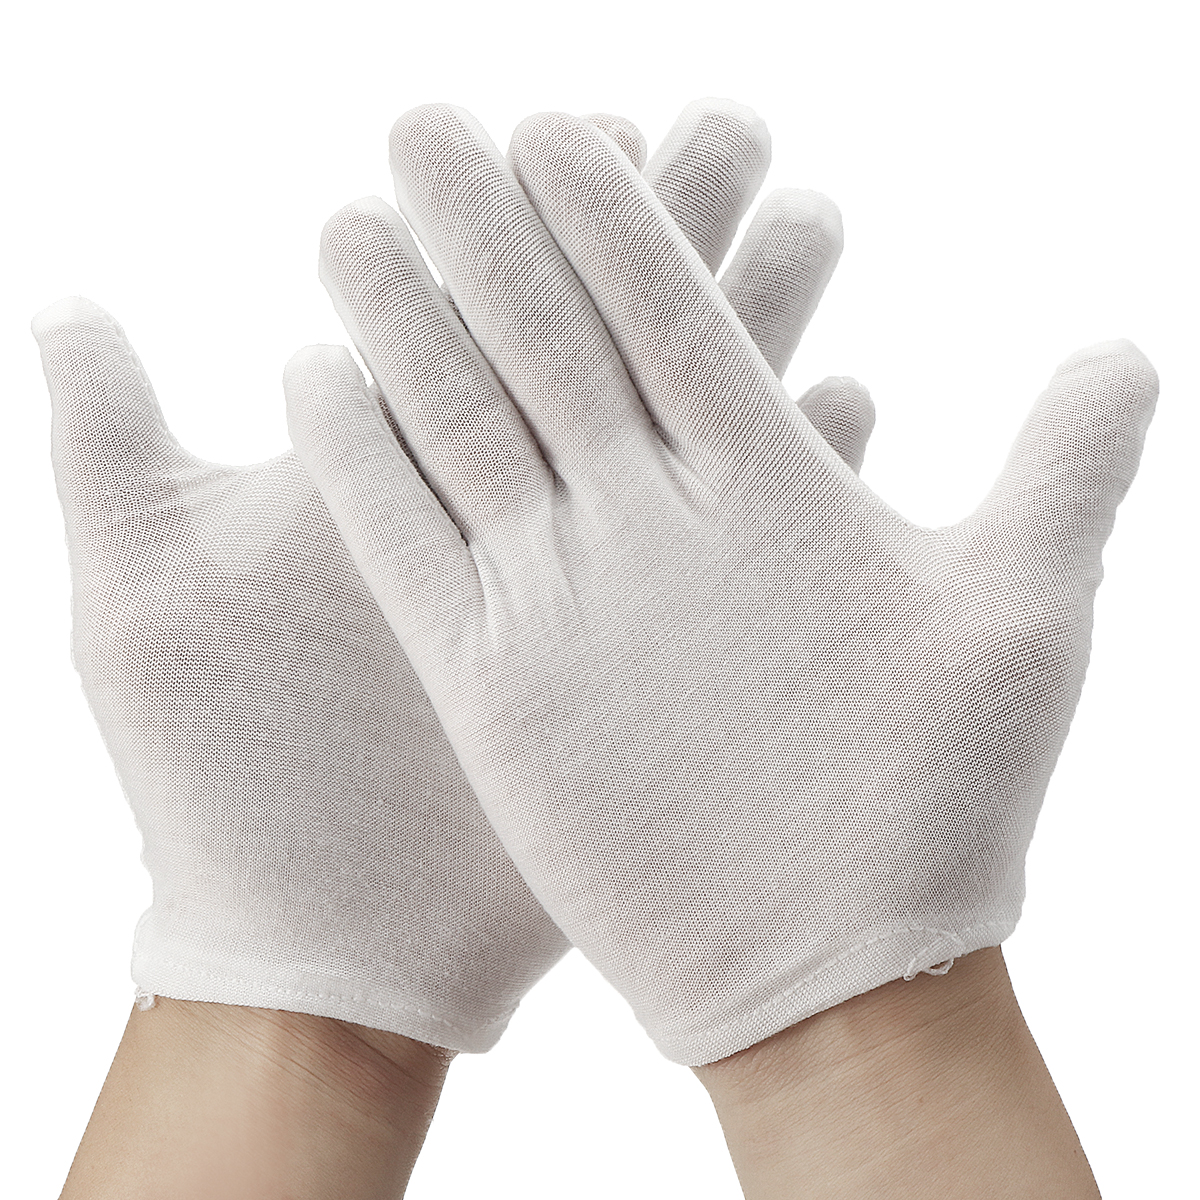 12-Pairs--Disposable-White-Glove-Soft-Cotton-Safety-Oil-Resistant-Camping-Picnic-BBQ-1696655-2